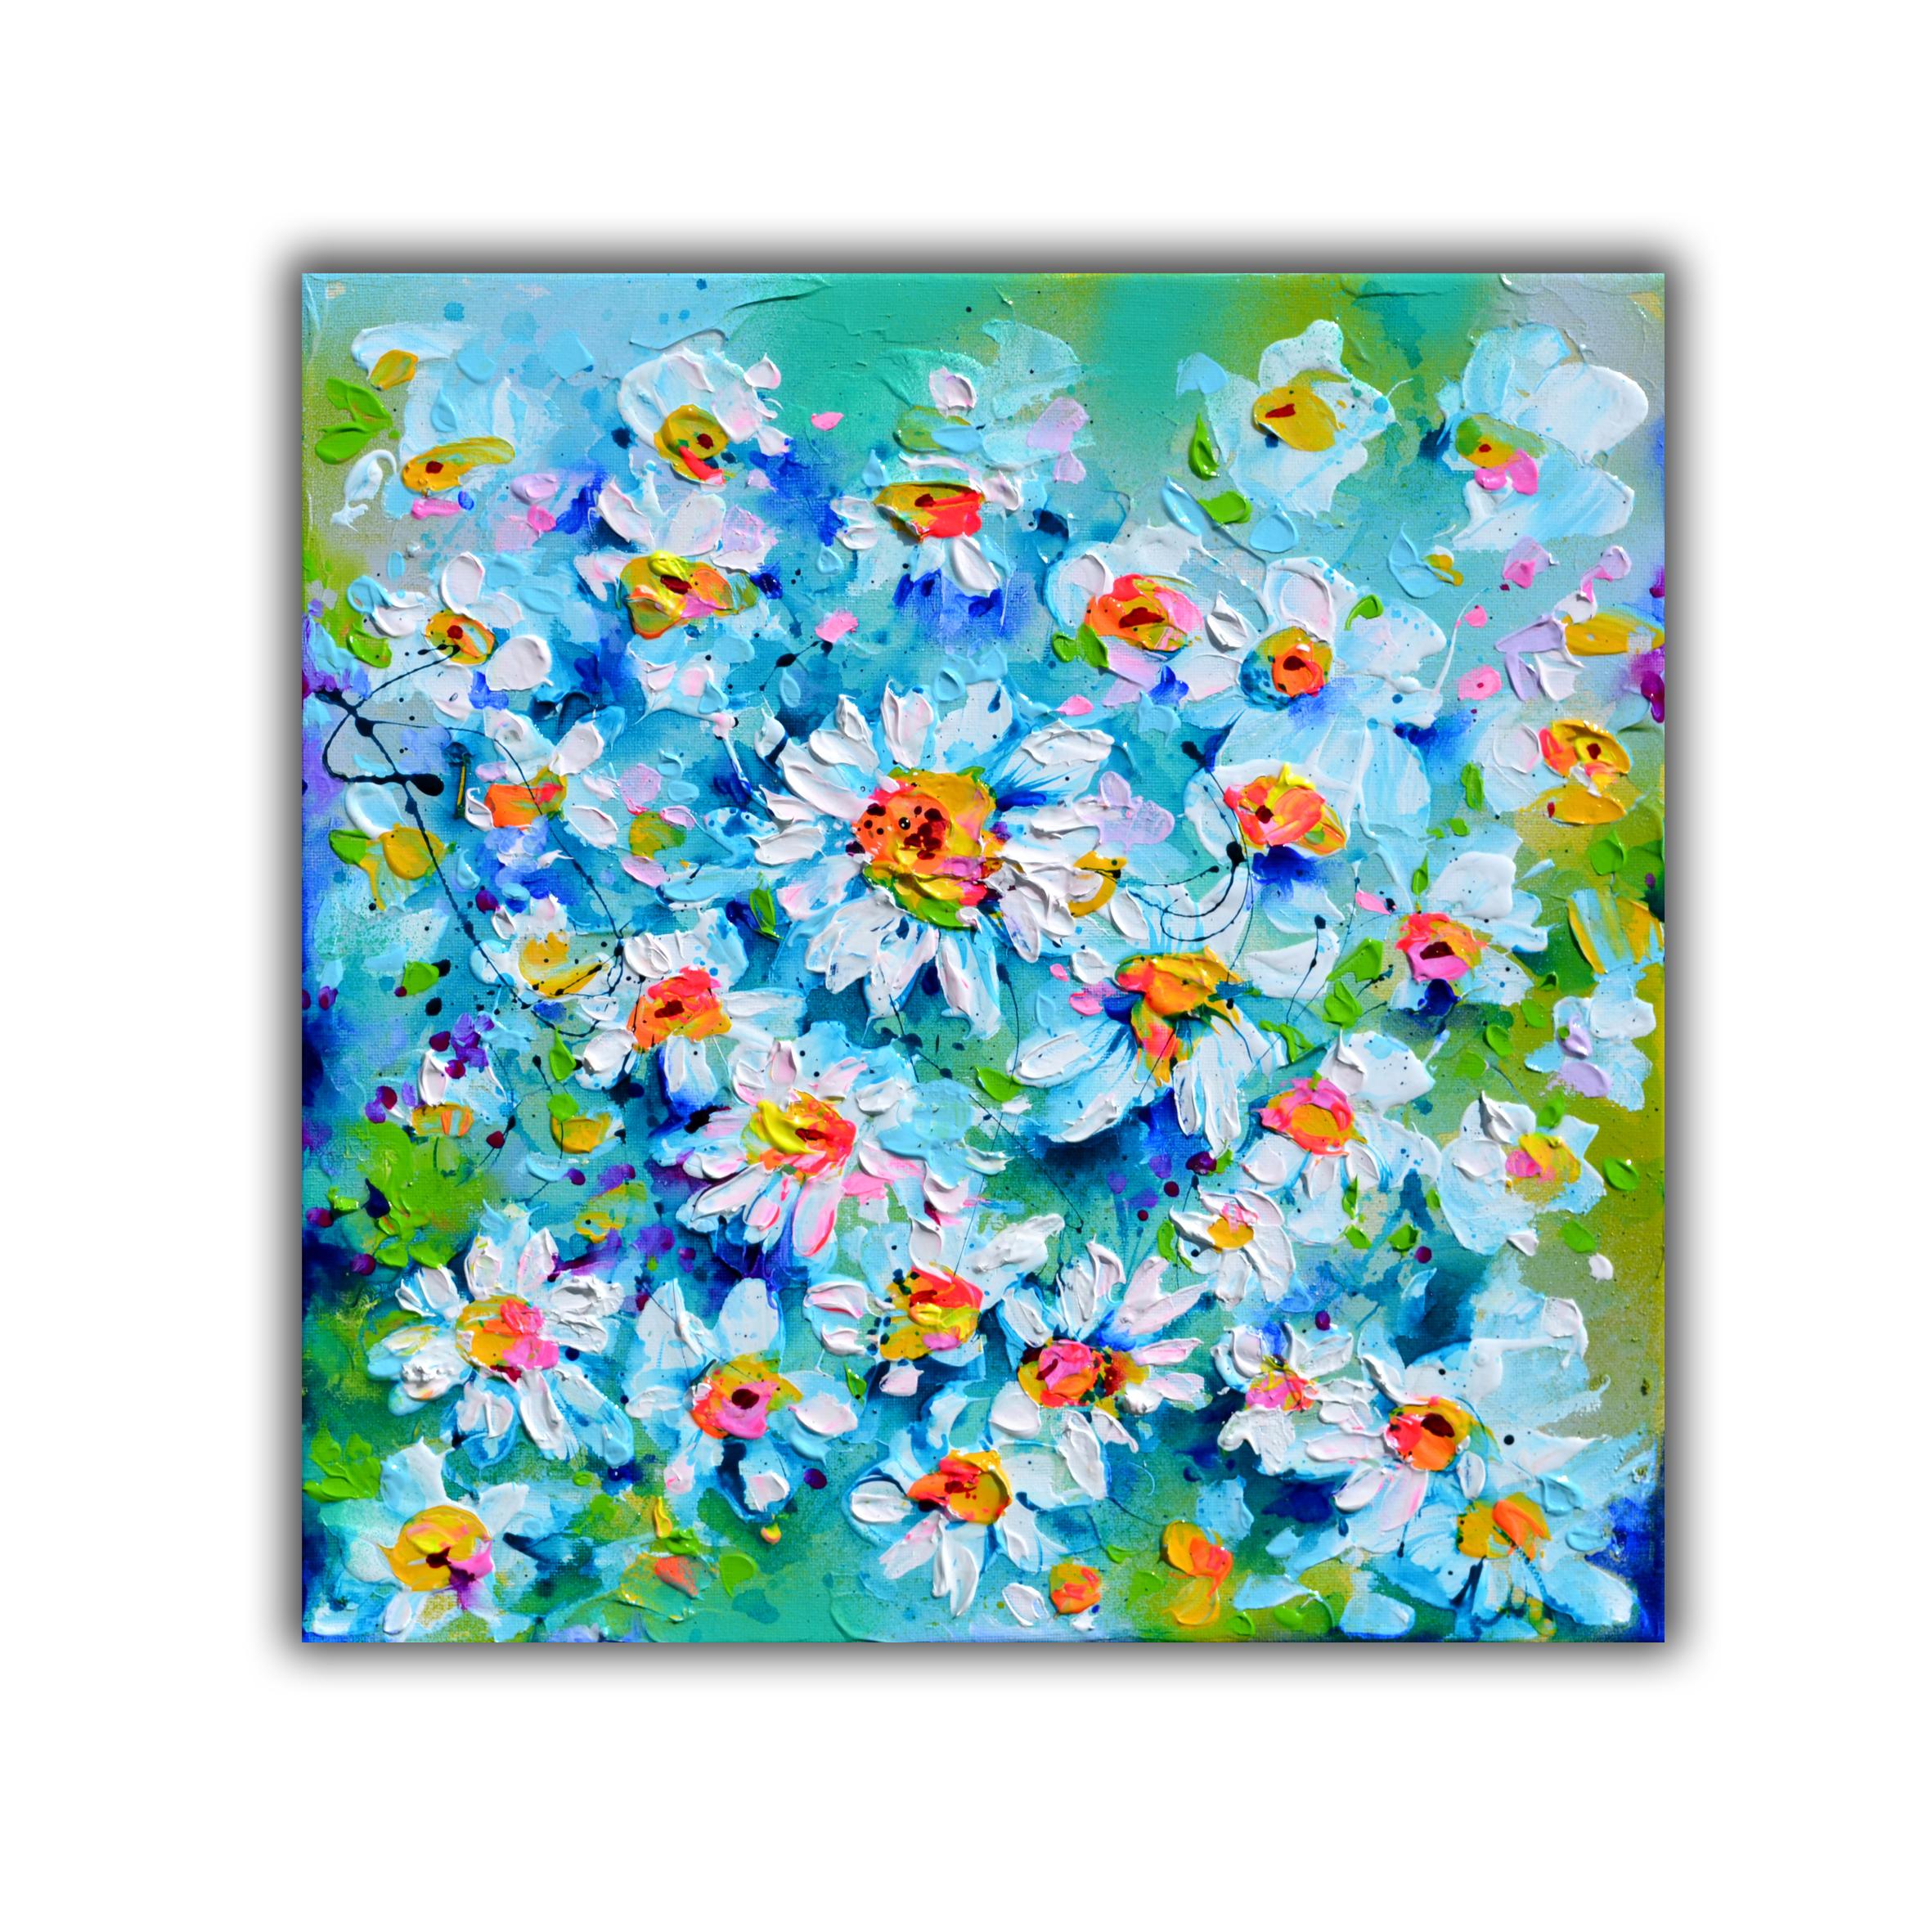 FREE WORLDWIDE SHIPPING!
A beautiful modern daisies field painting, made in relief with palette knife with professional varnished acrylics and Amsterdam acrylic sprays on stretched heavy canvas.
I ship this marvellous artwork ready to